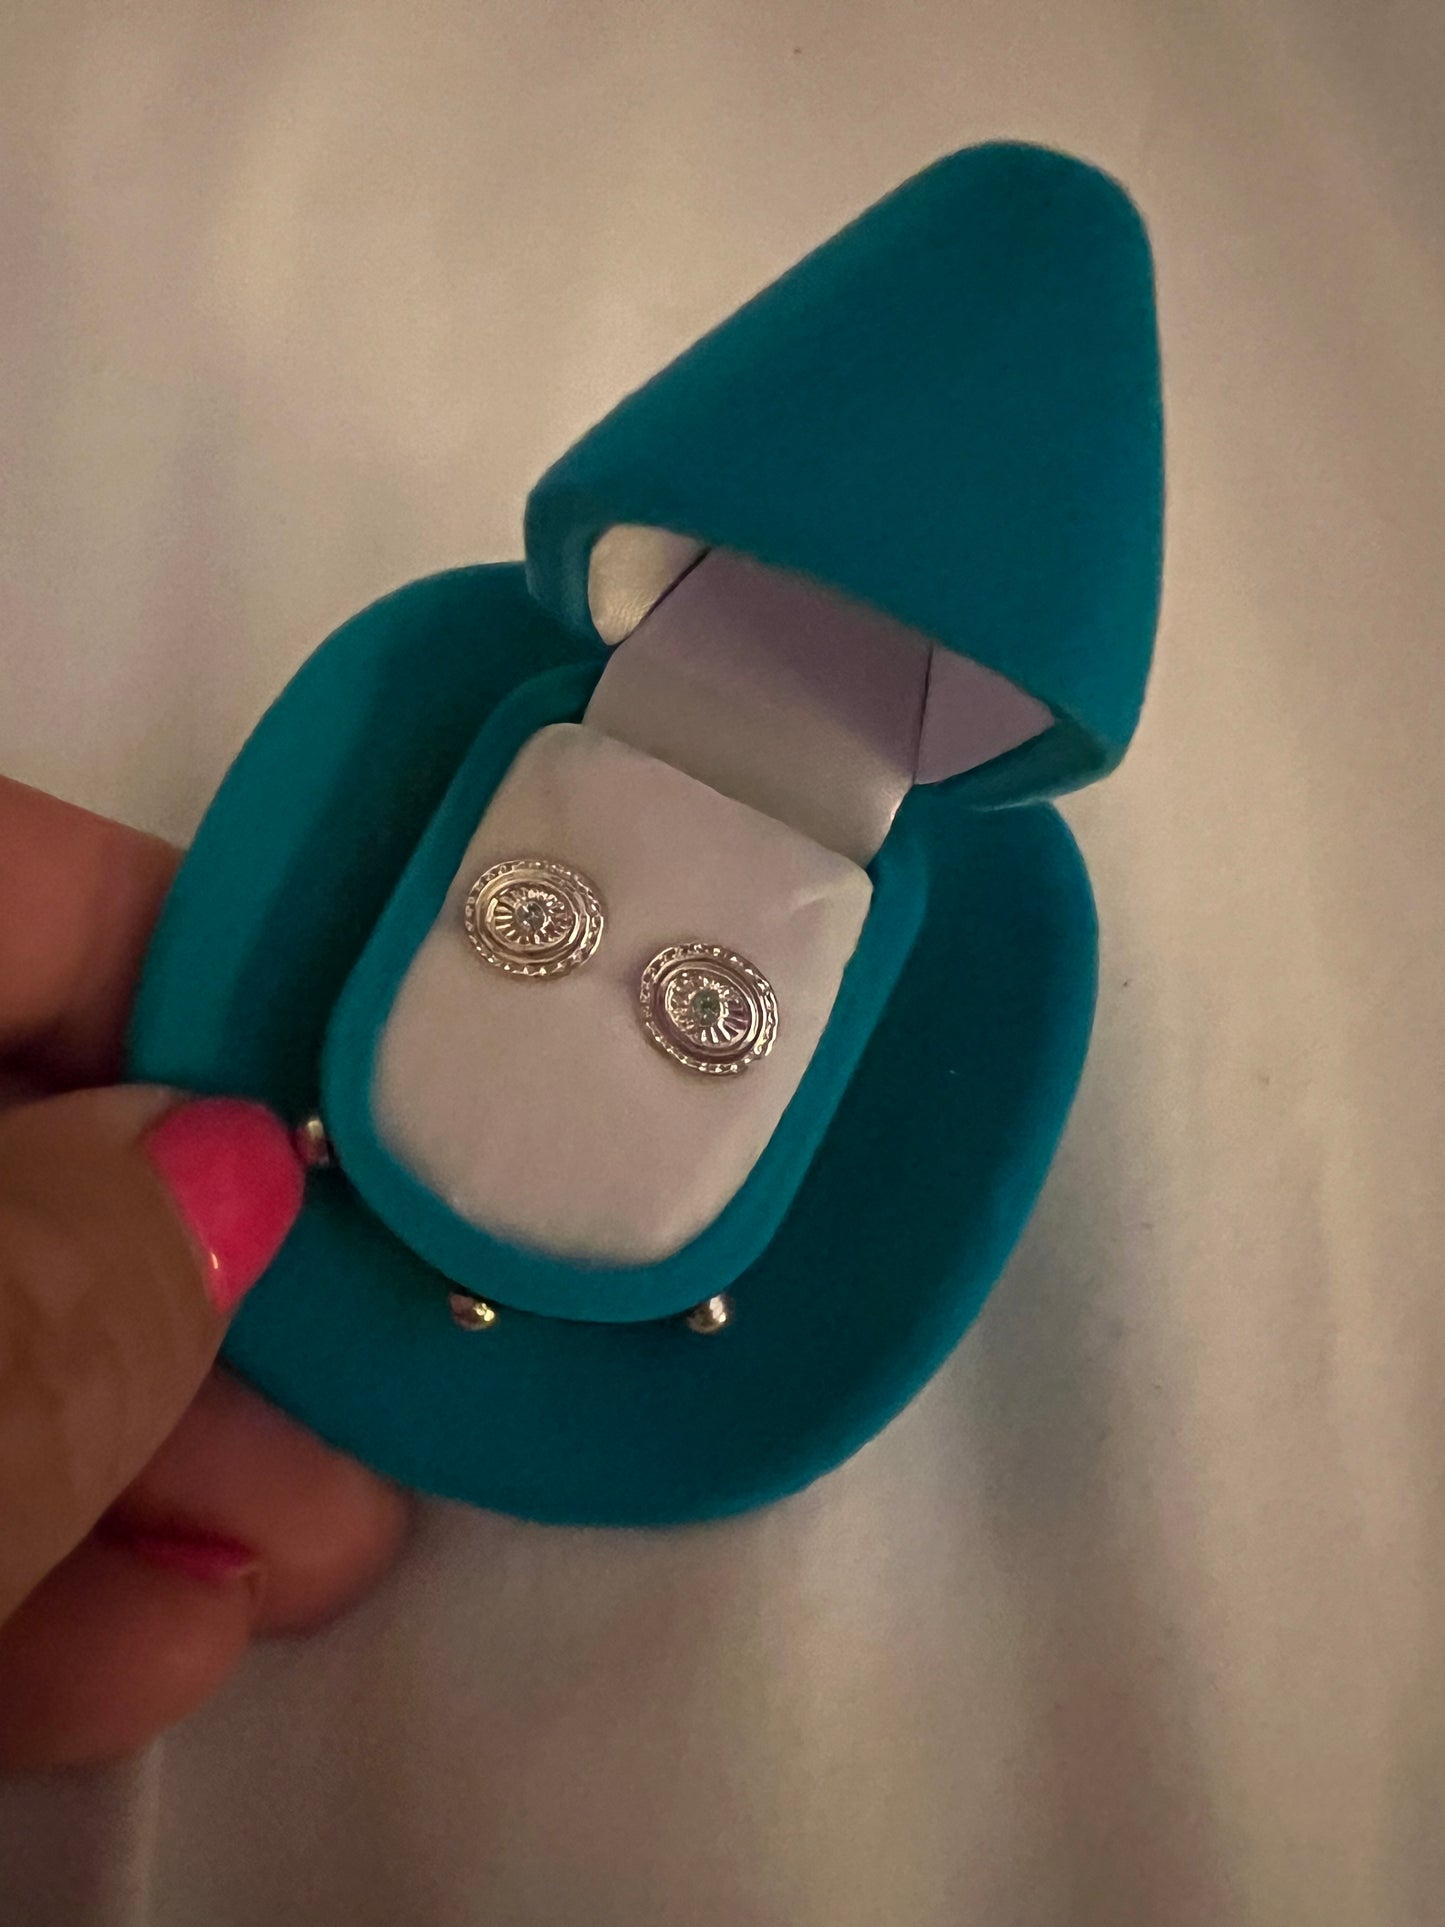 AWST Chonco Earrings with Cowboy Hat Gift Box